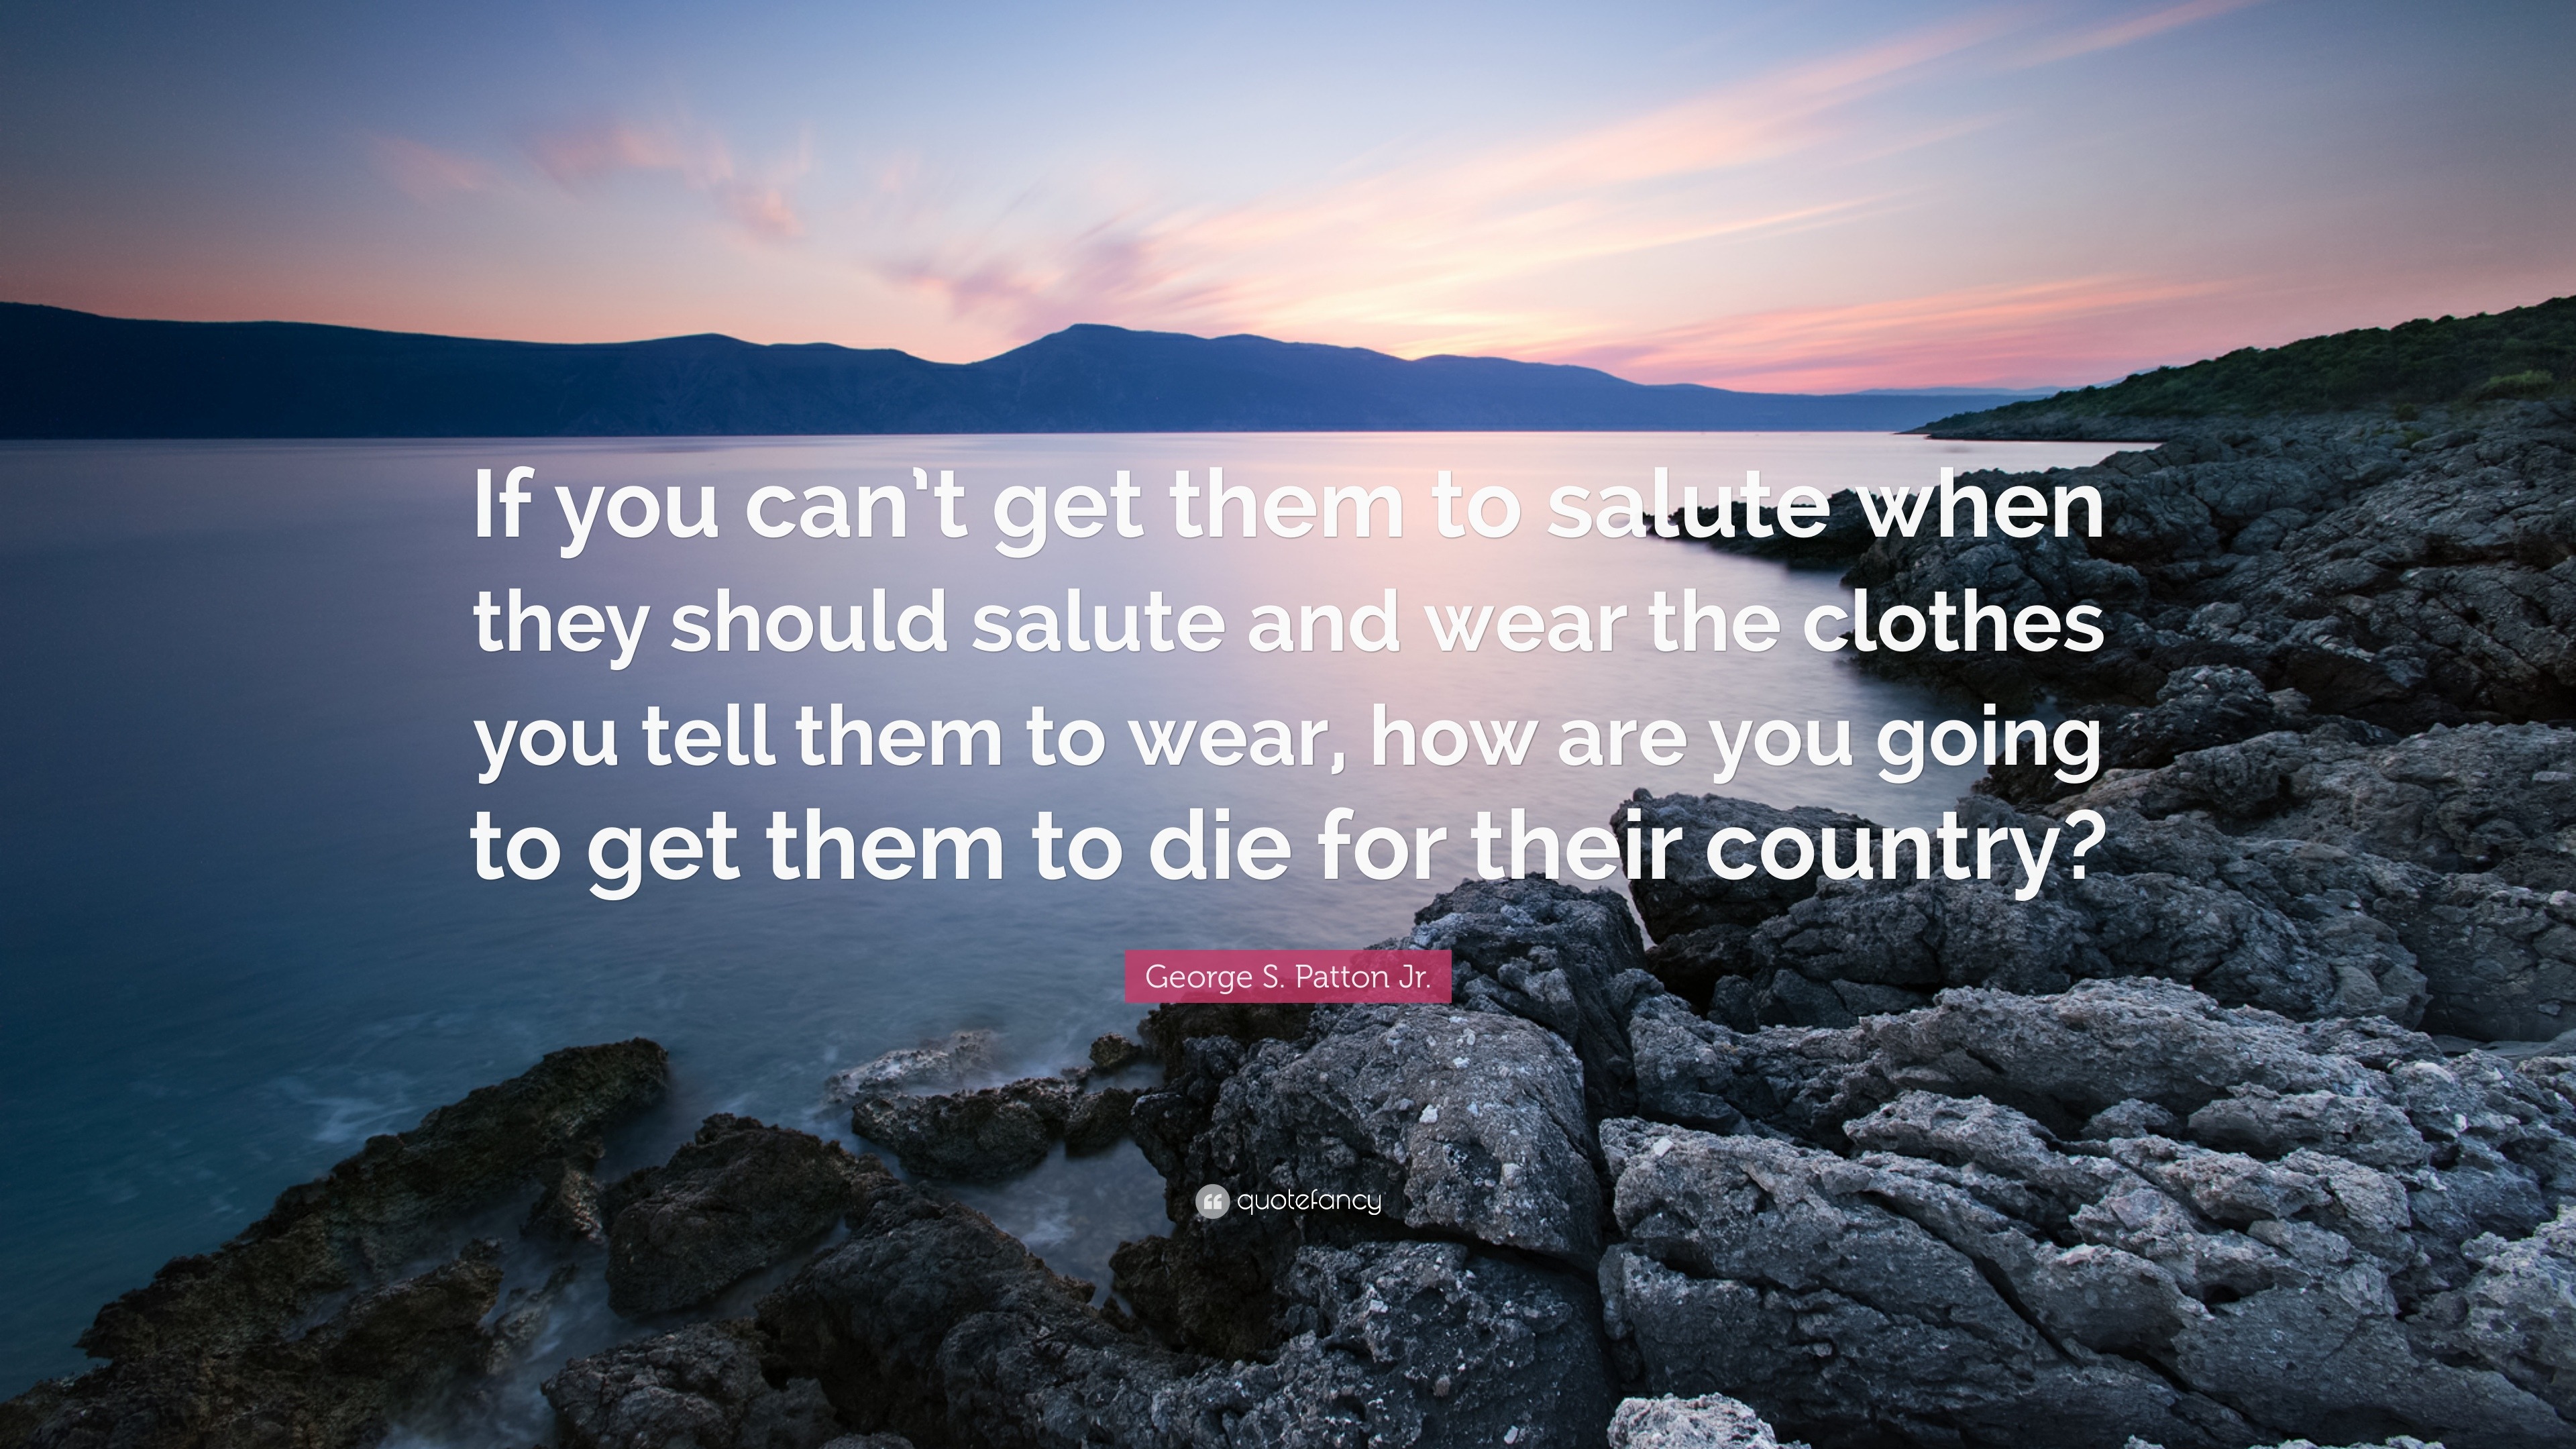 George S. Patton Jr. Quote: “If you can’t get them to salute when they ...